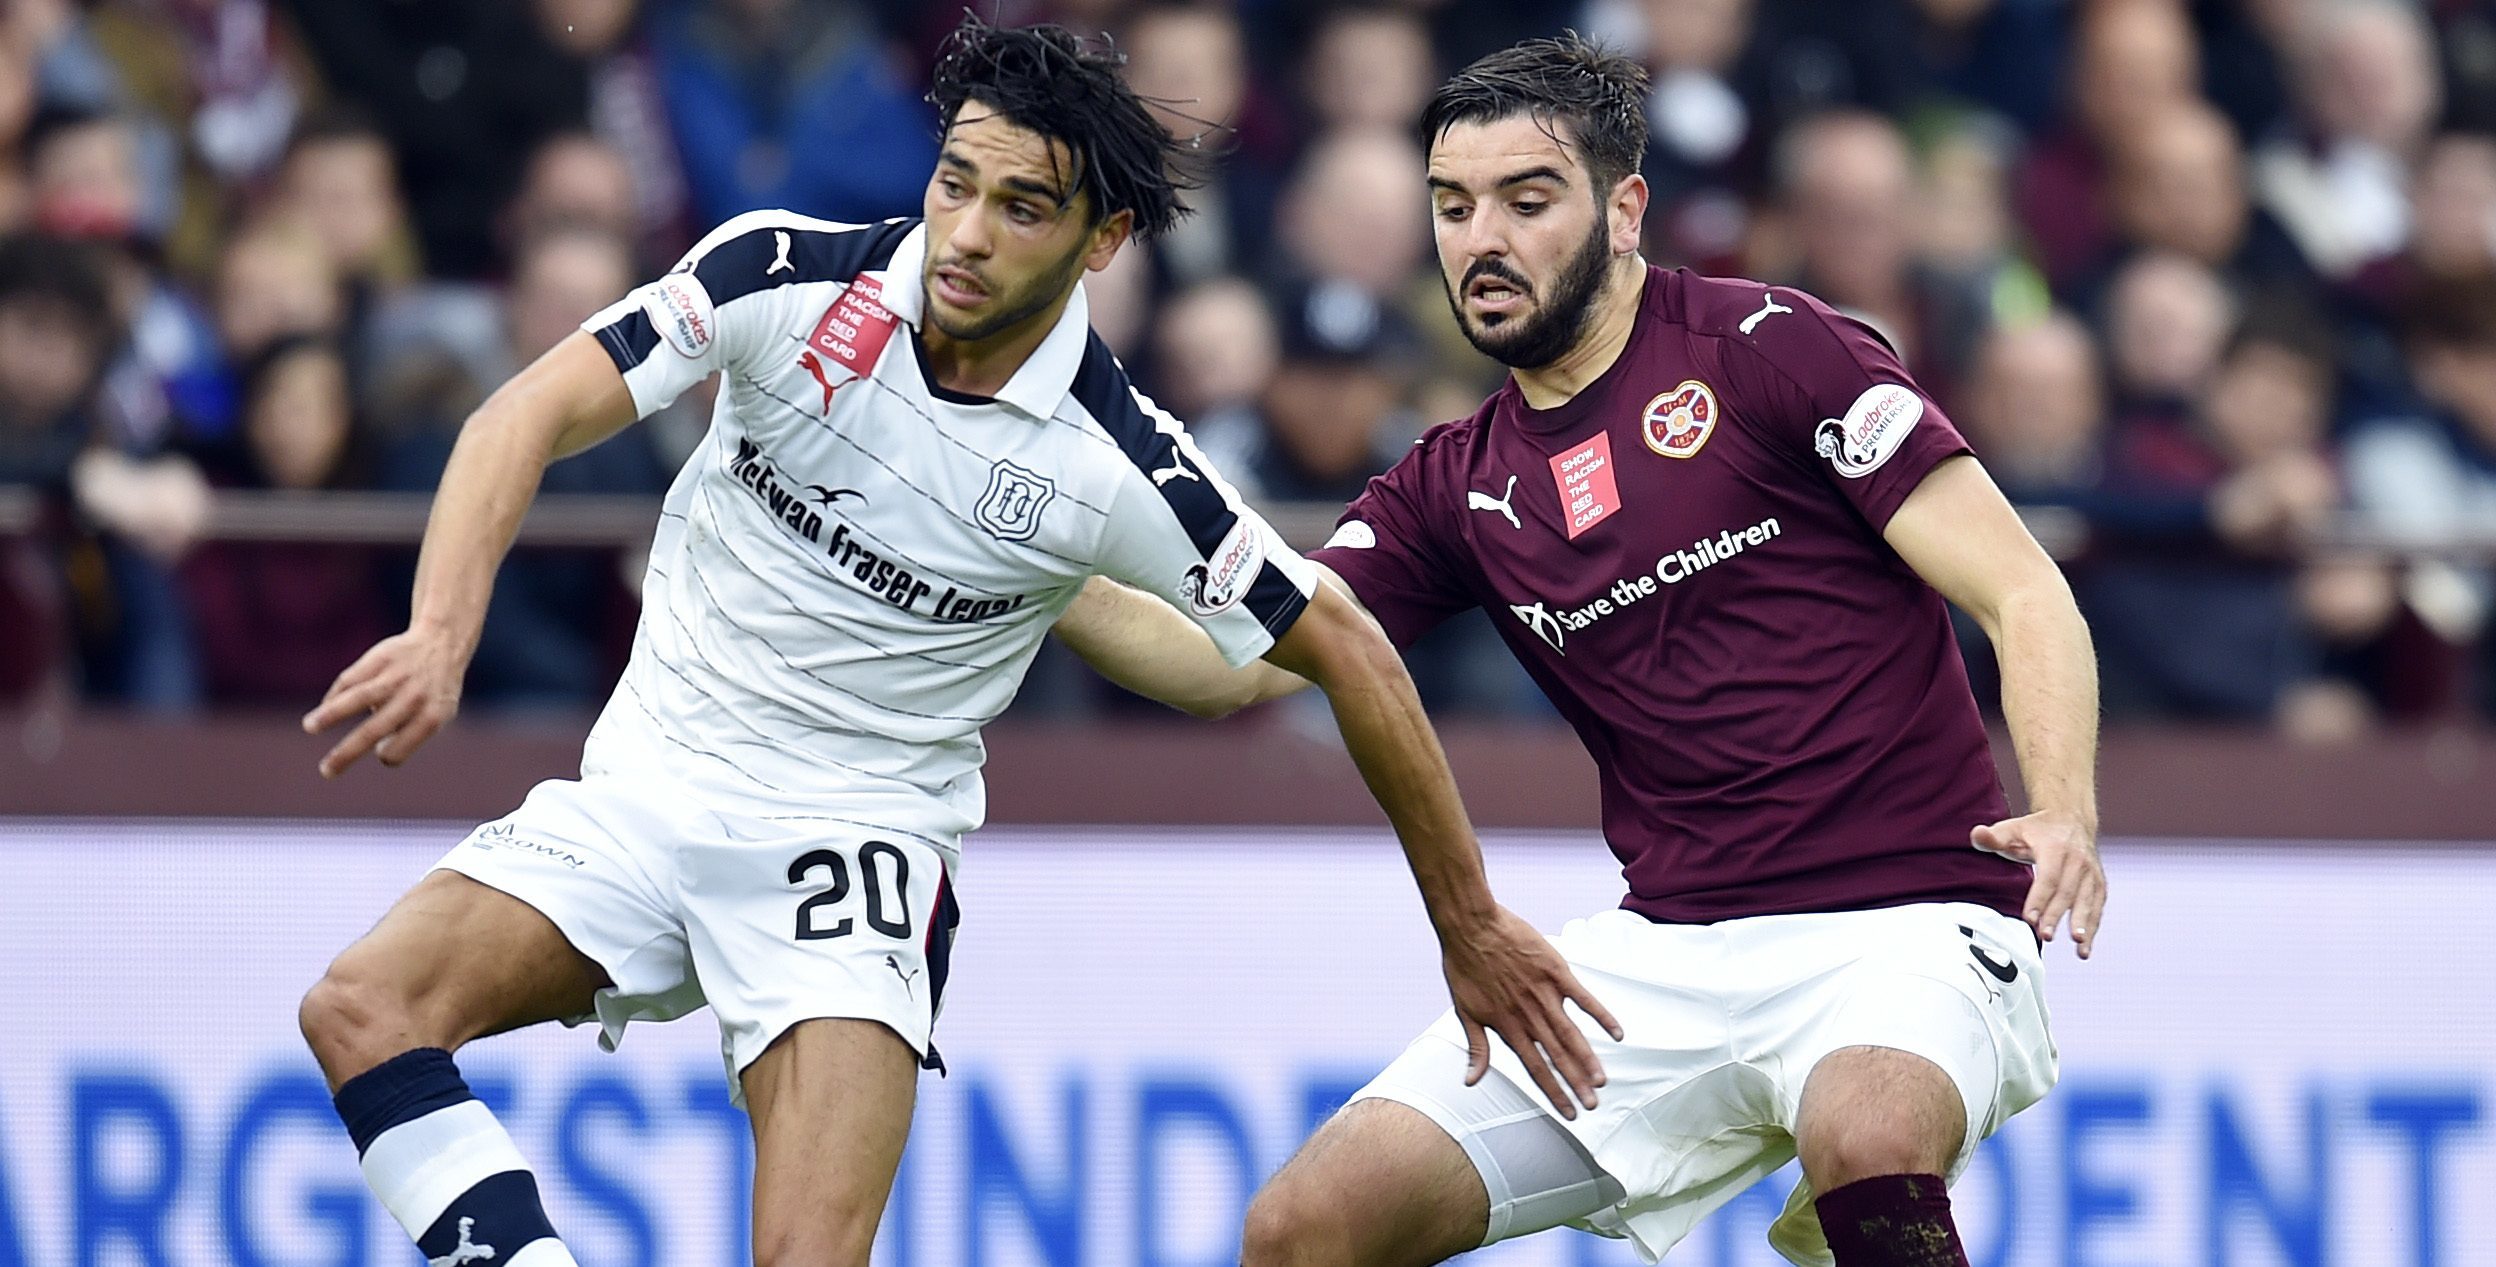 Action from the game at Tynecastle.